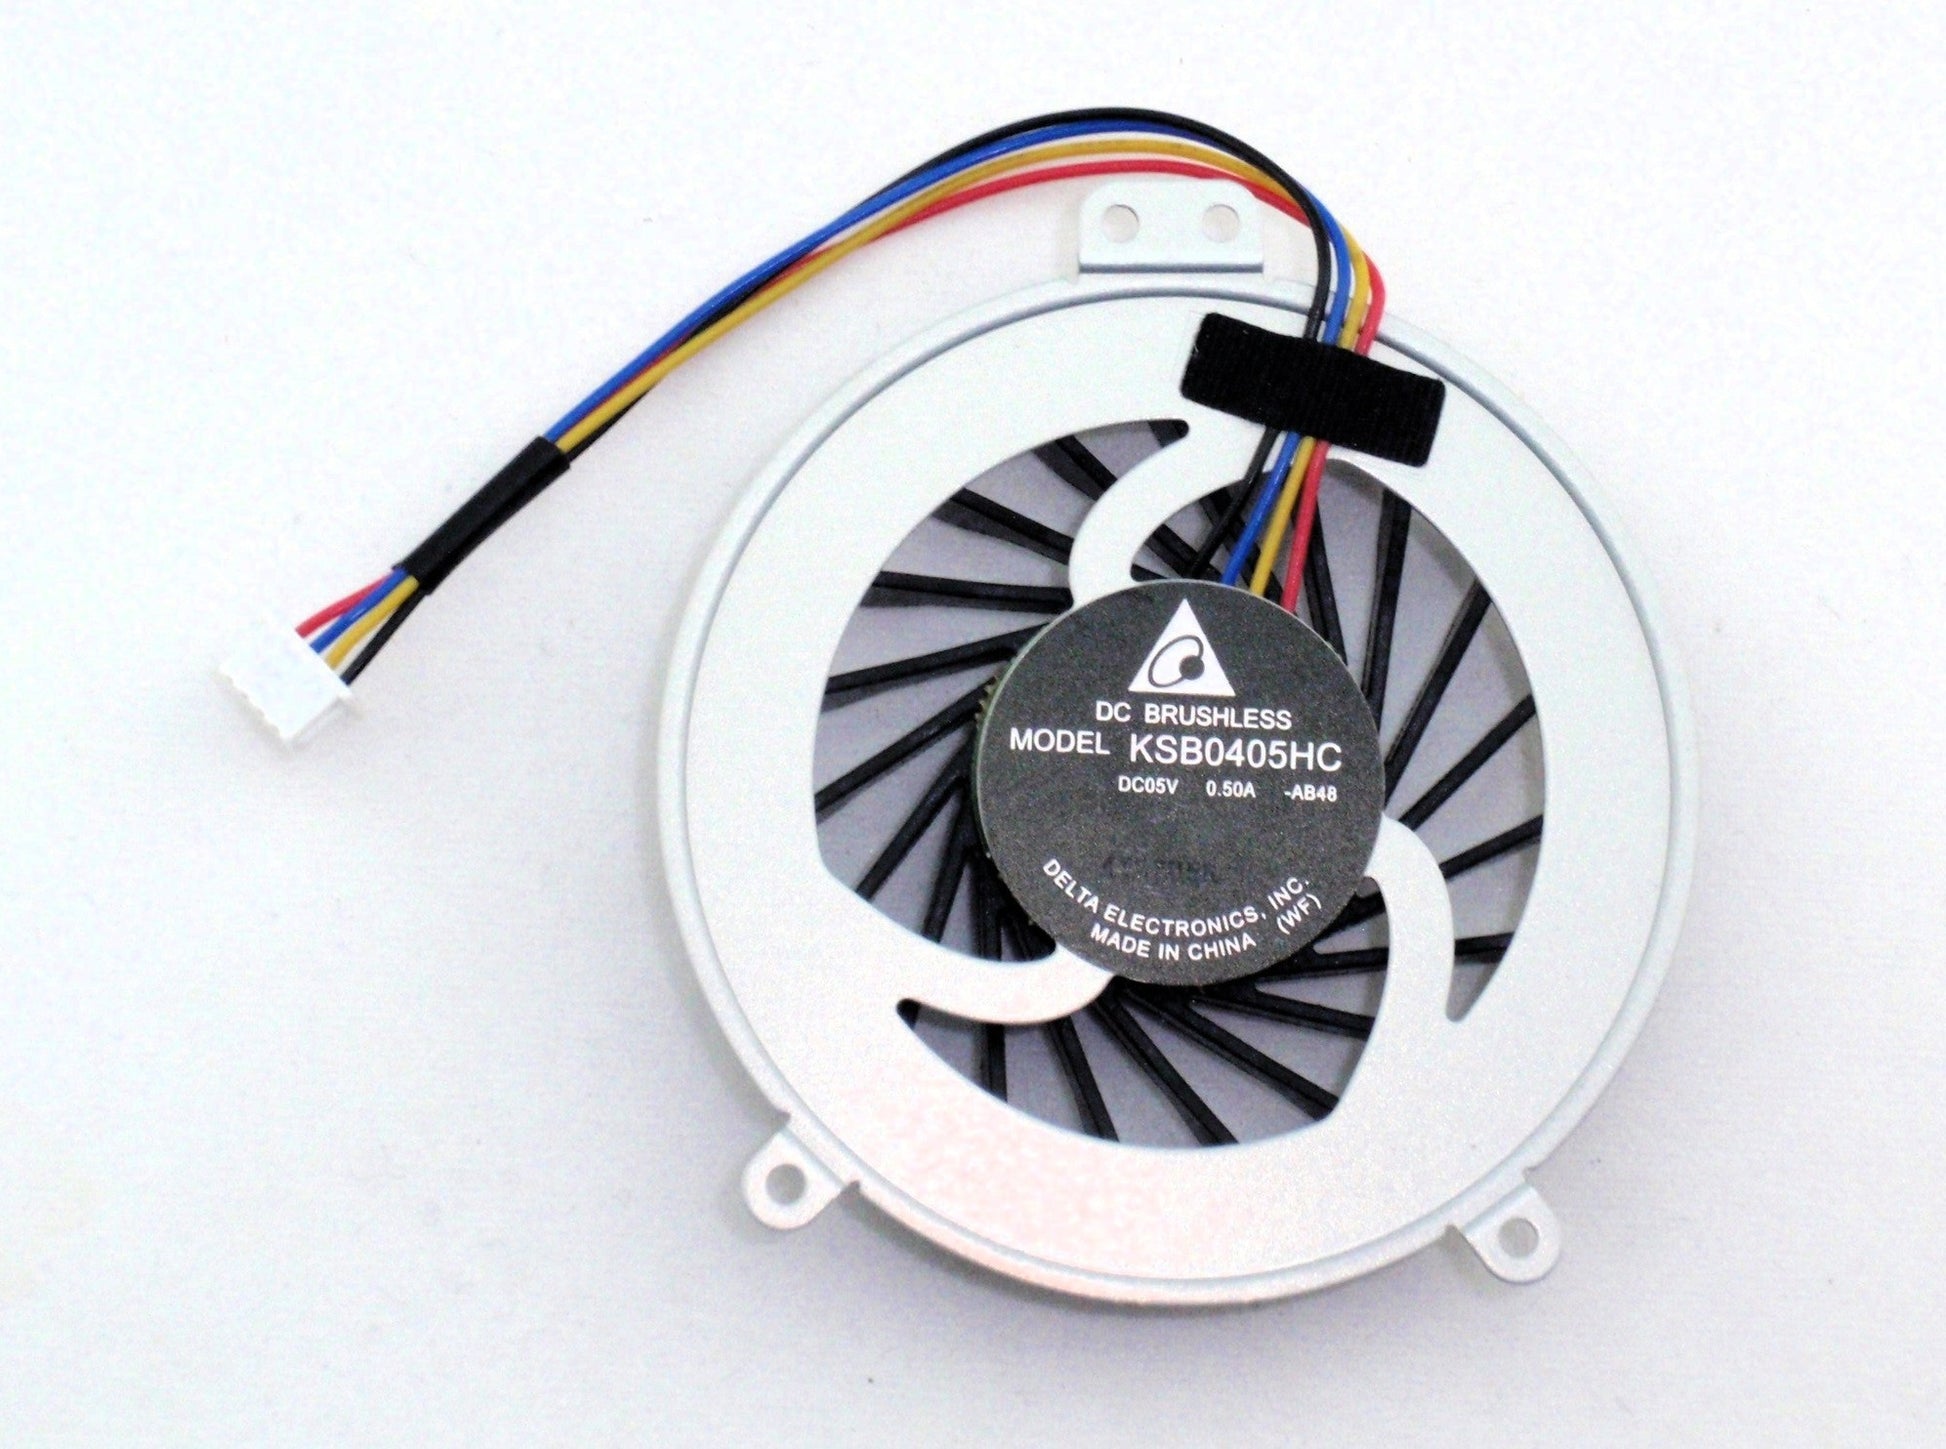 Lenovo New Round CPU Thermal Cooling Fan 4-Wire IdeaPad Z360 Z360a KSB0405HC AB48